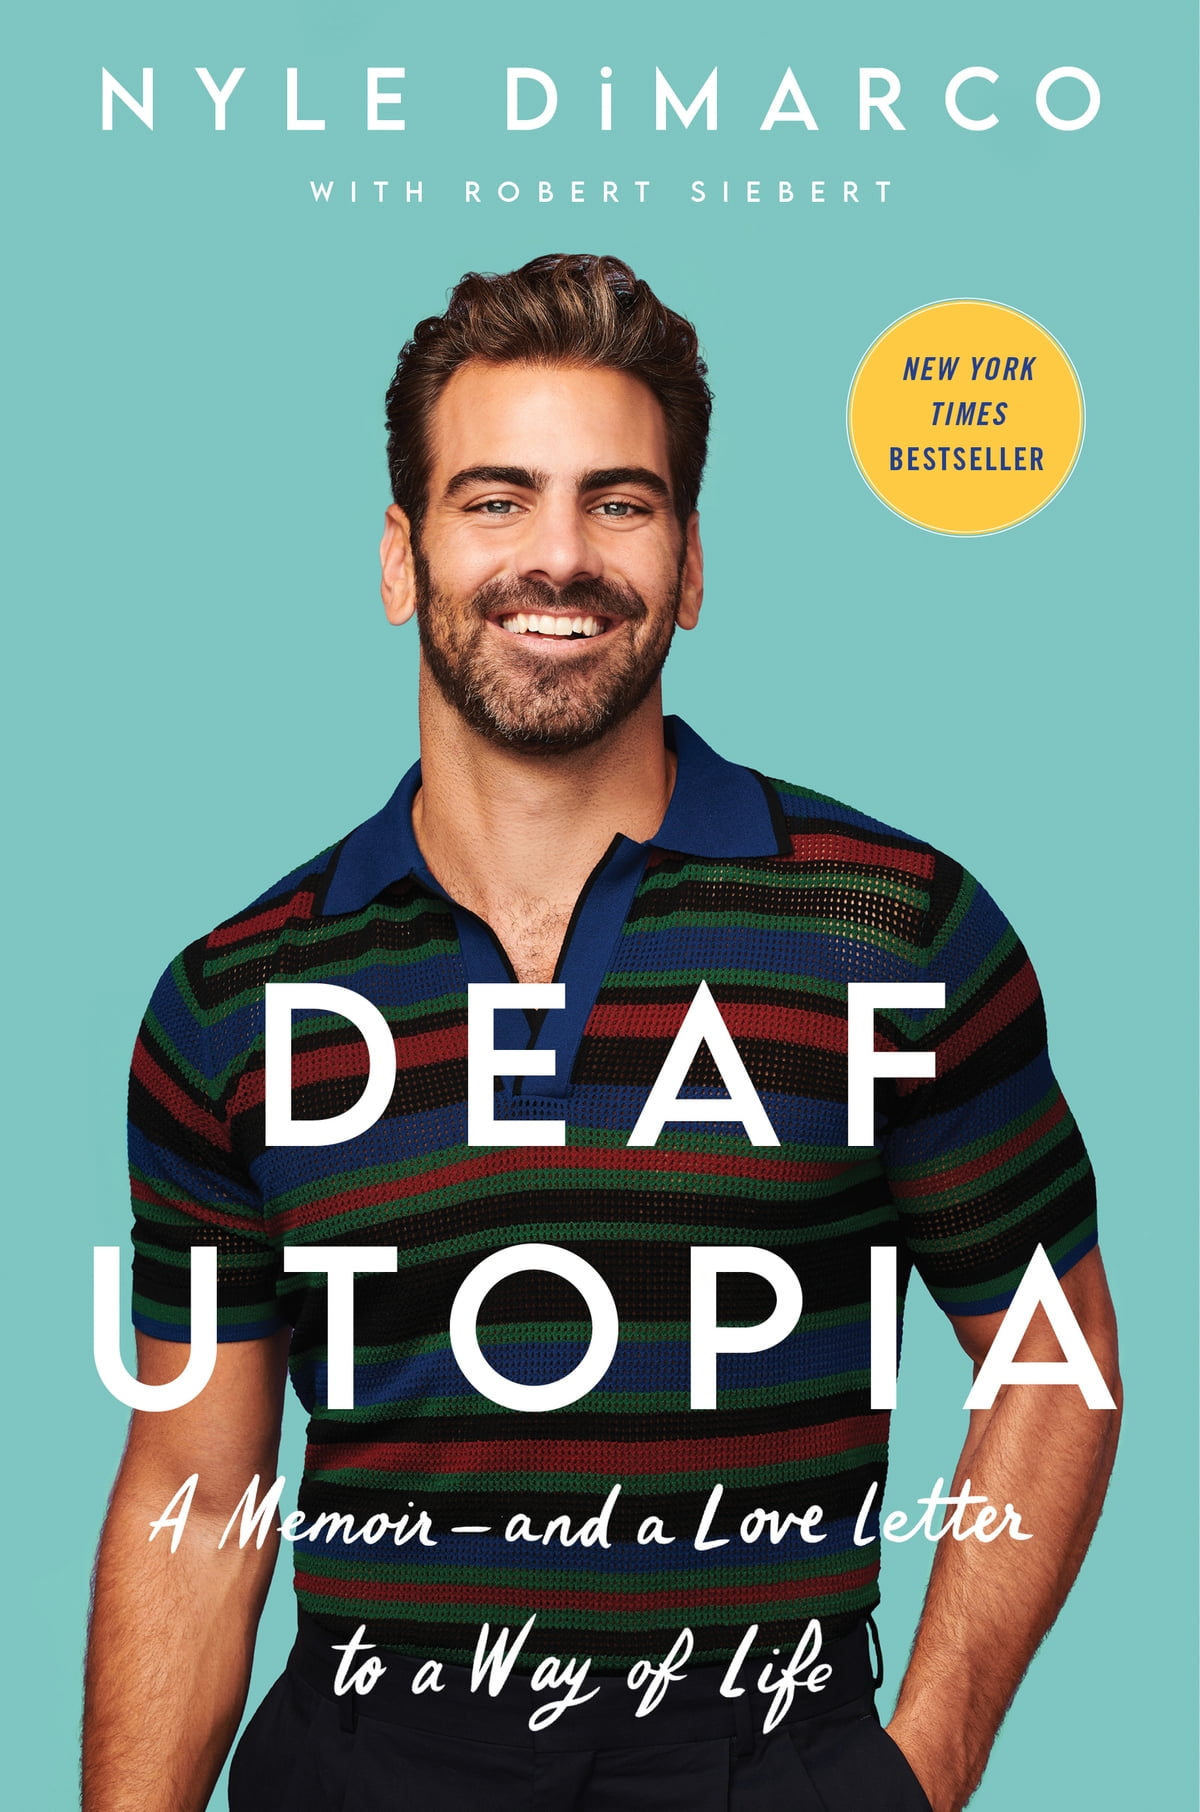 Nyle DiMarco is central on the cover of his book, Deaf Utopia. He smiles at the camera